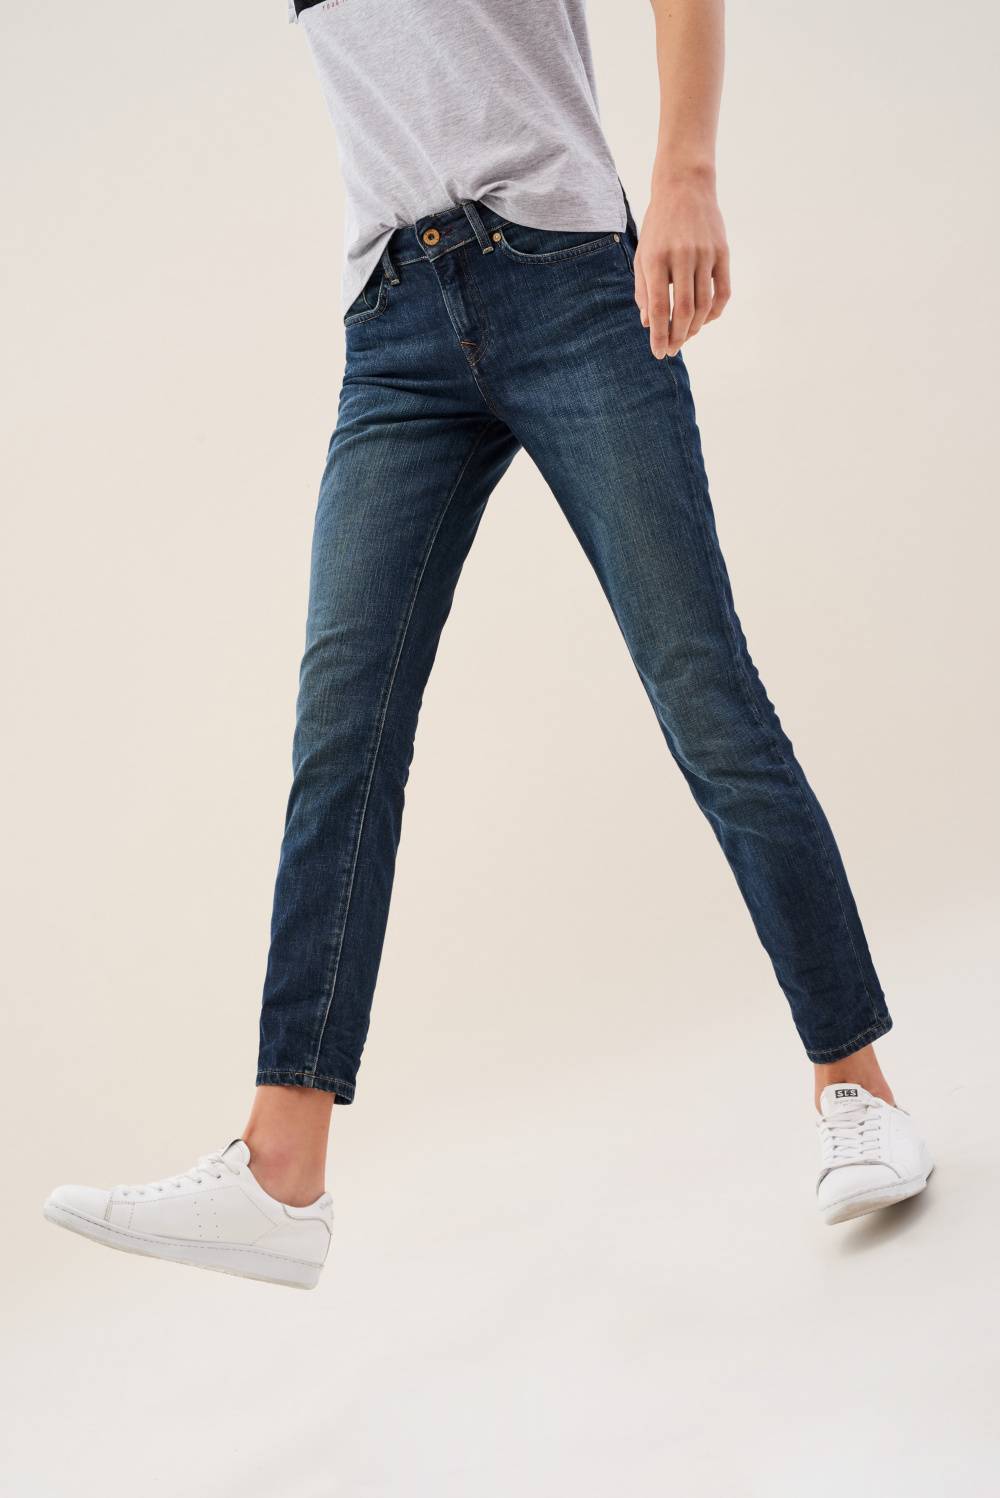 jeans slimming it escuros, Salsa €79,95_2